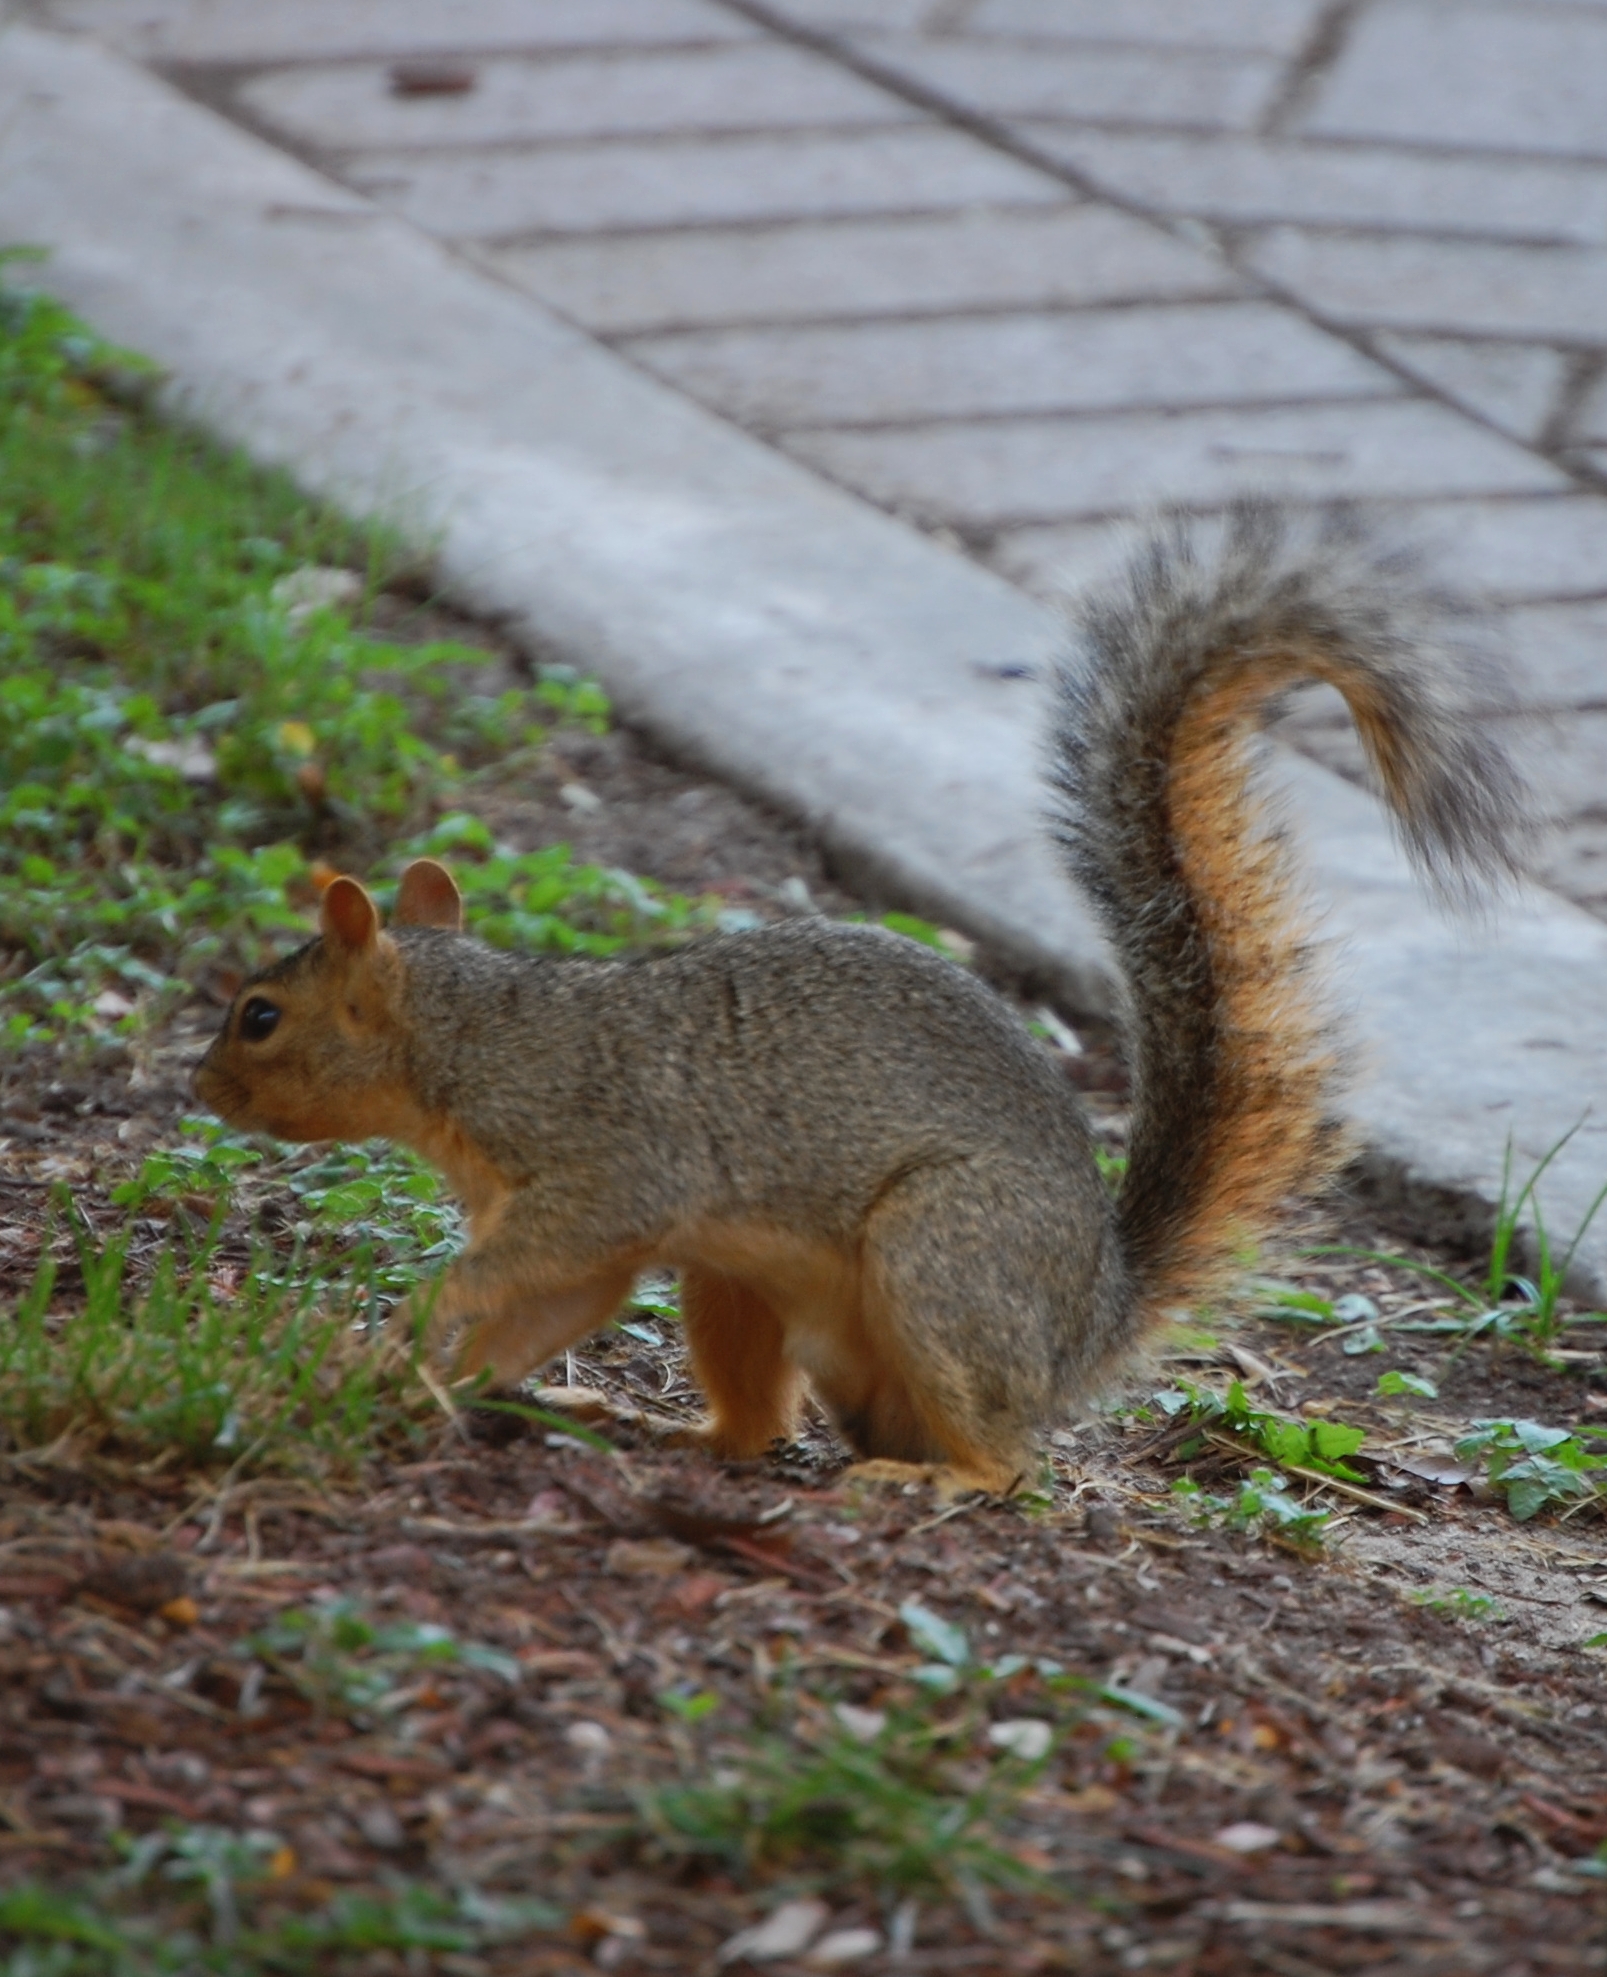 a gray squirrel standing on grass and dirt with sidewalk nearby